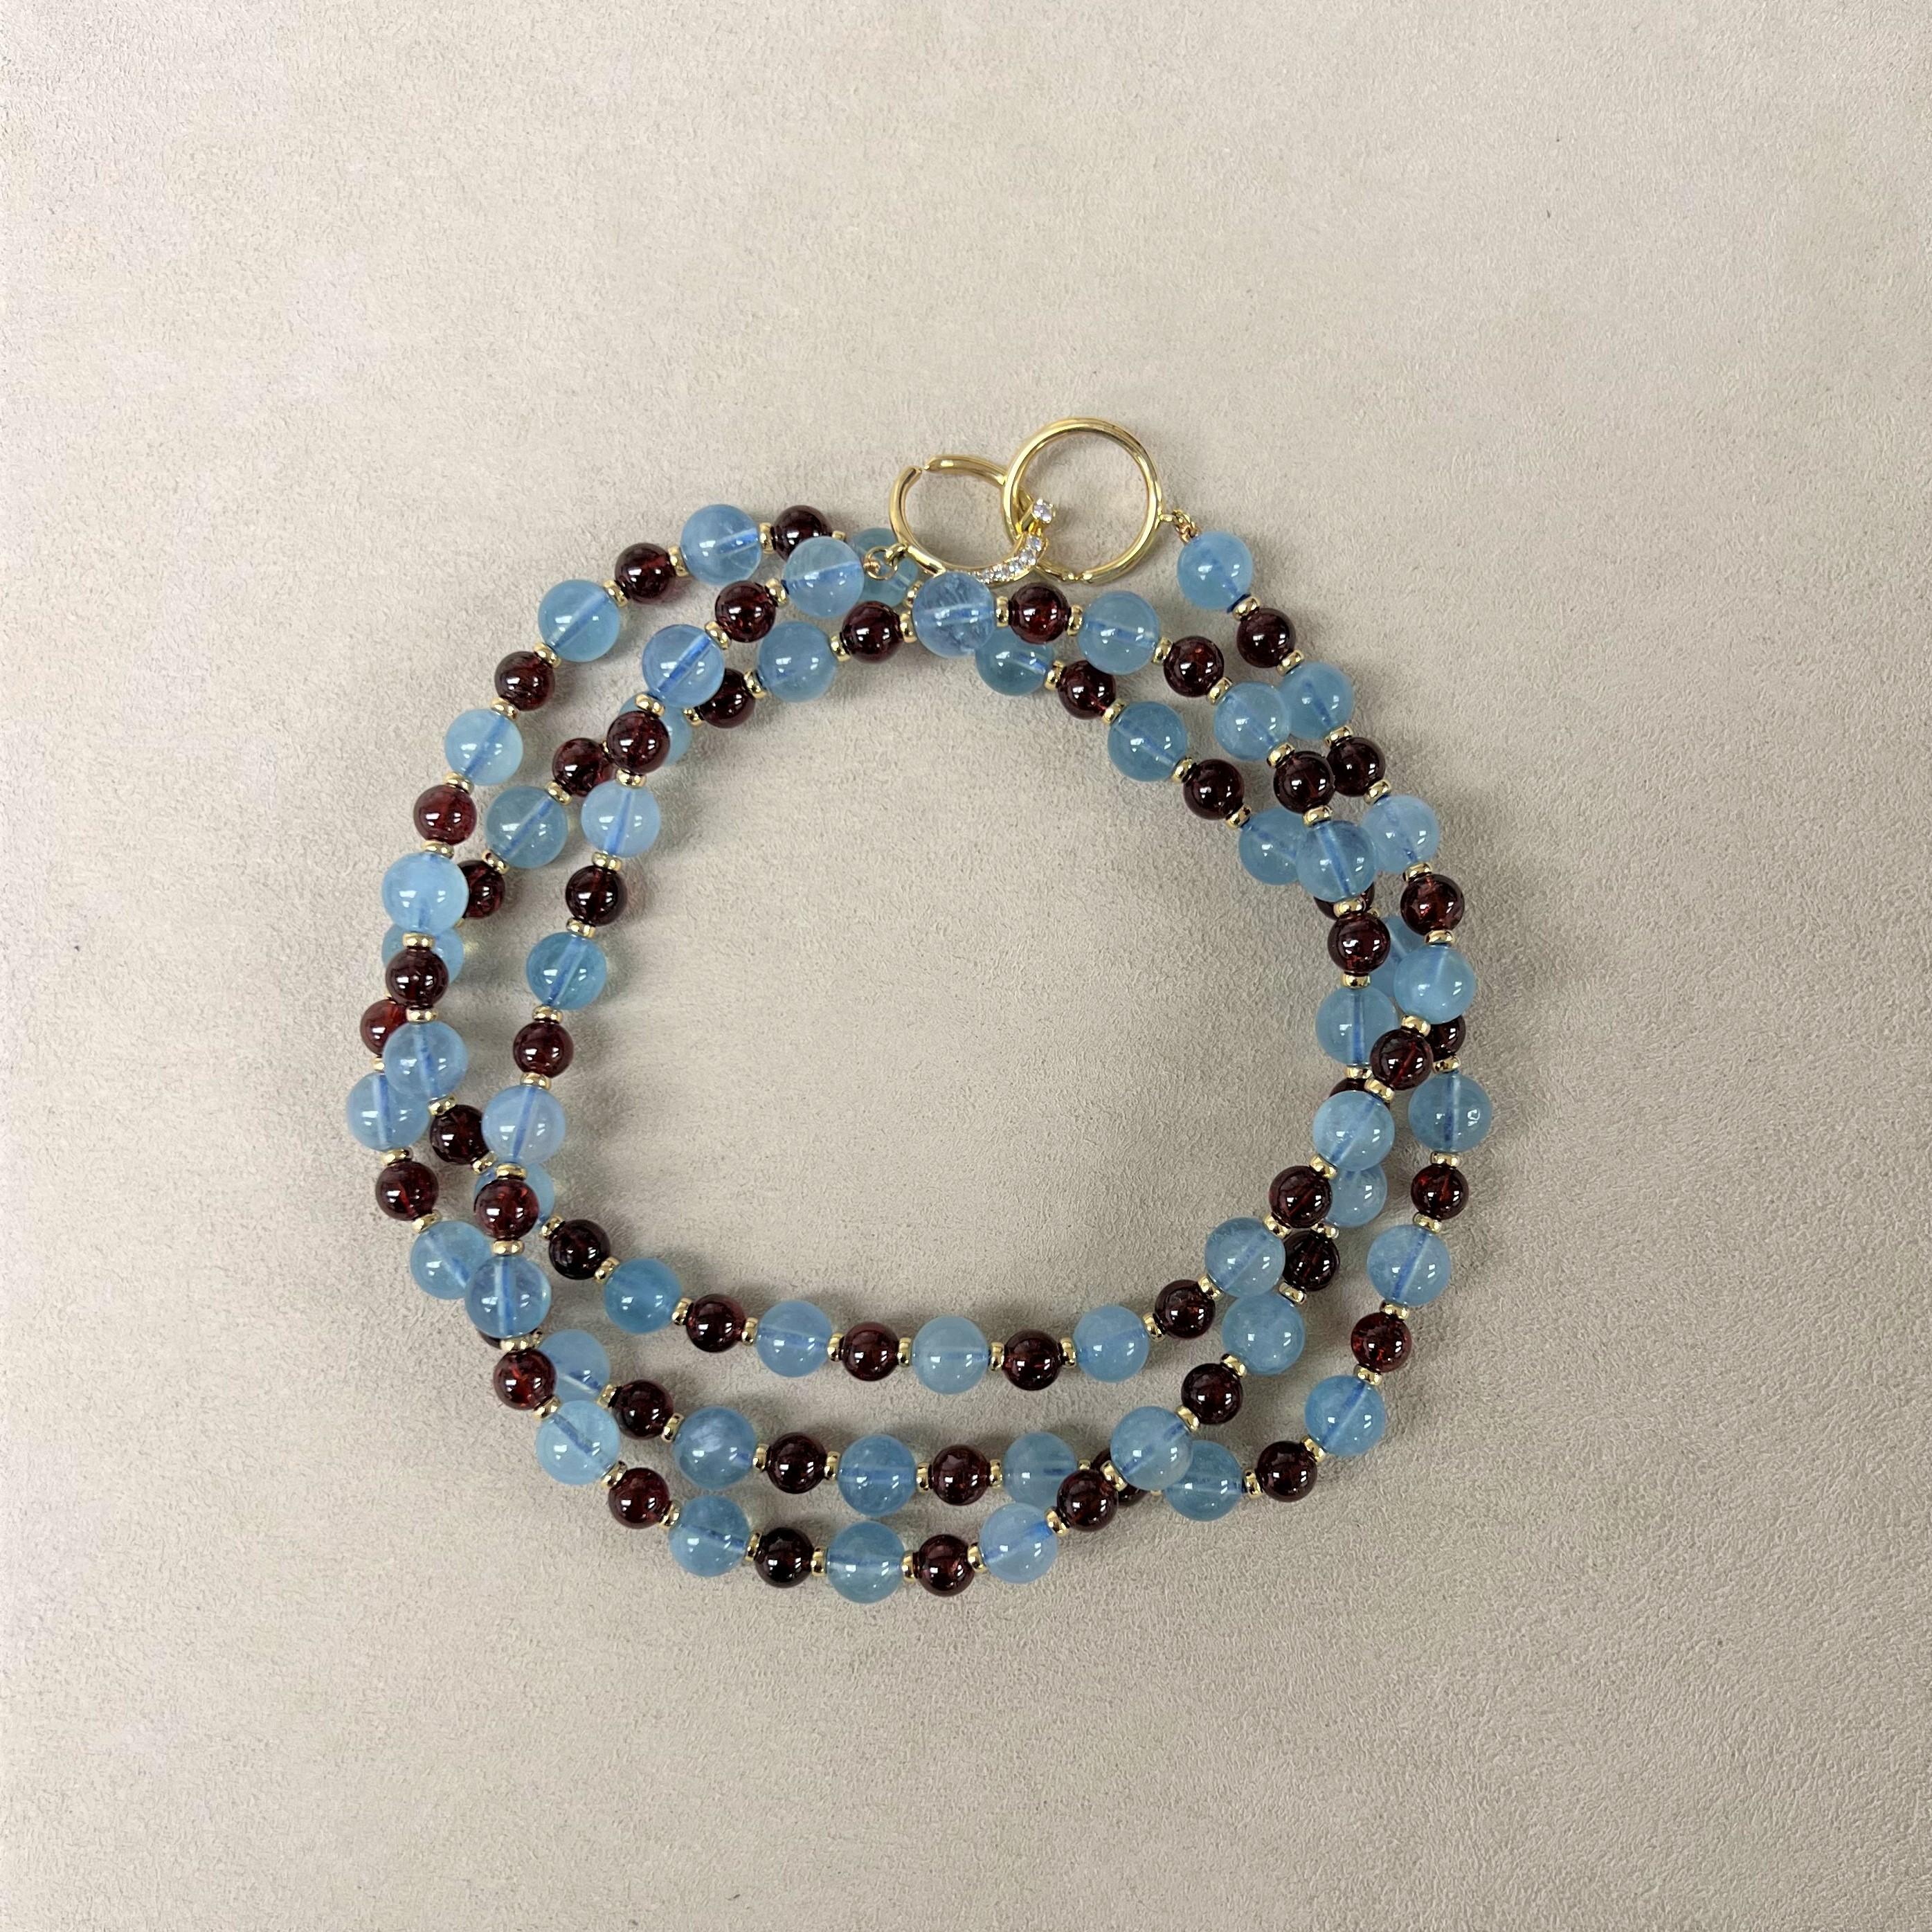 Created in 18 karat yellow gold
36 inch length
Aquamarine 195 carats approx.
Rhodolite Garnet 125 carats approx.
18kyg roundels 
18kyg diamond studded circle clasp
Strung on silk
Limited edition

About the Designers

Drawing inspiration from little